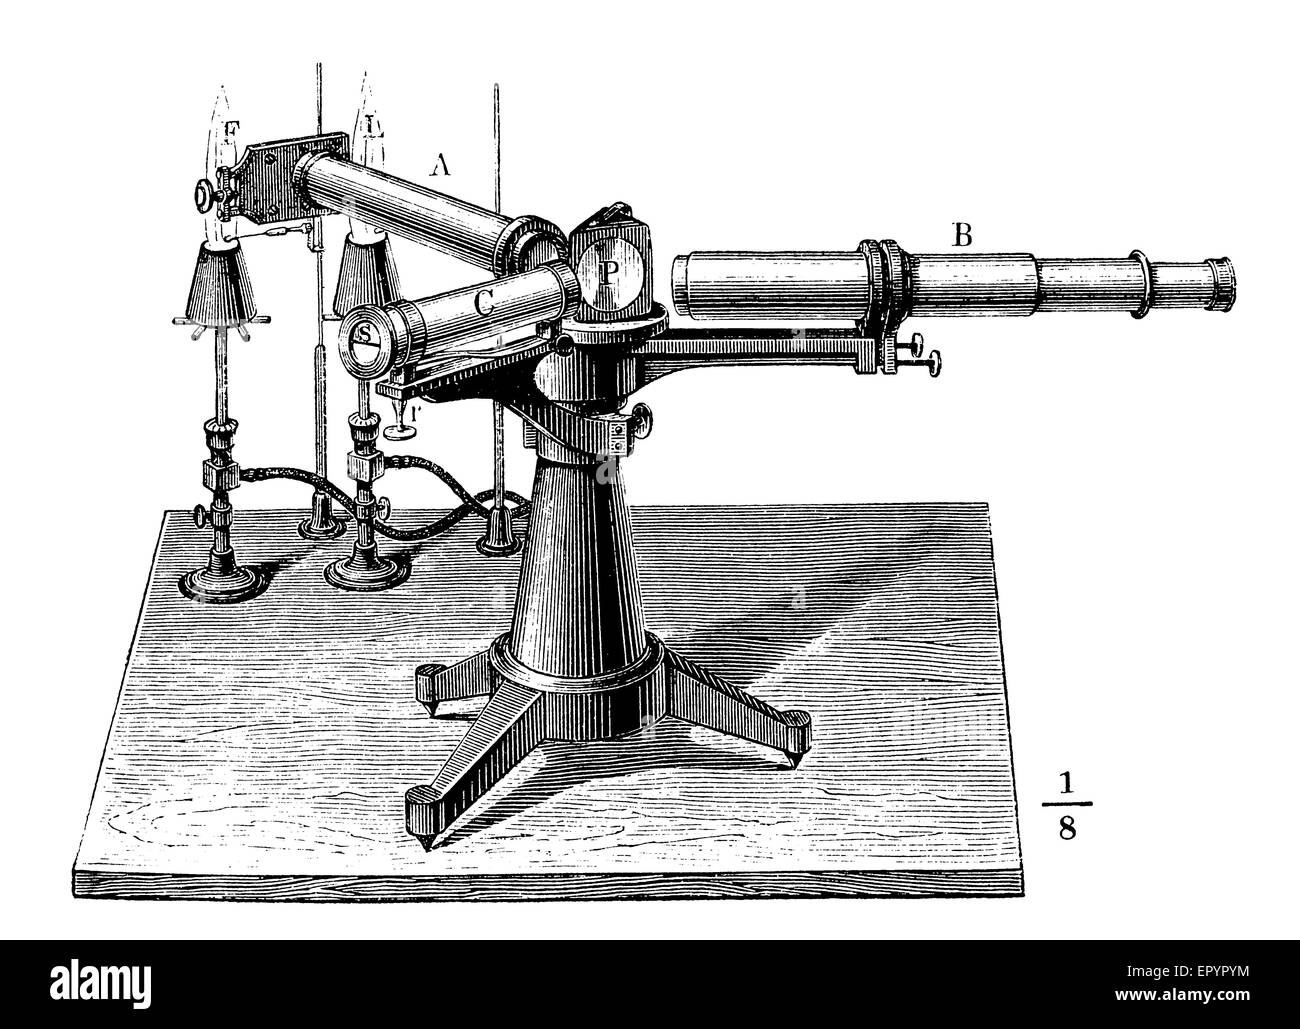 Vintage engraving, optical spectrometer or spectroscope is an instrument used in spectroscopy for producing spectral lines and measuring their wavelengths and intensities. Joseph von Fraunhofer developed the first modern spectroscope, Gustav Robert Kirchhoff and Robert Bunsen discovered the application of spectroscopes to chemical analysis. Stock Photo